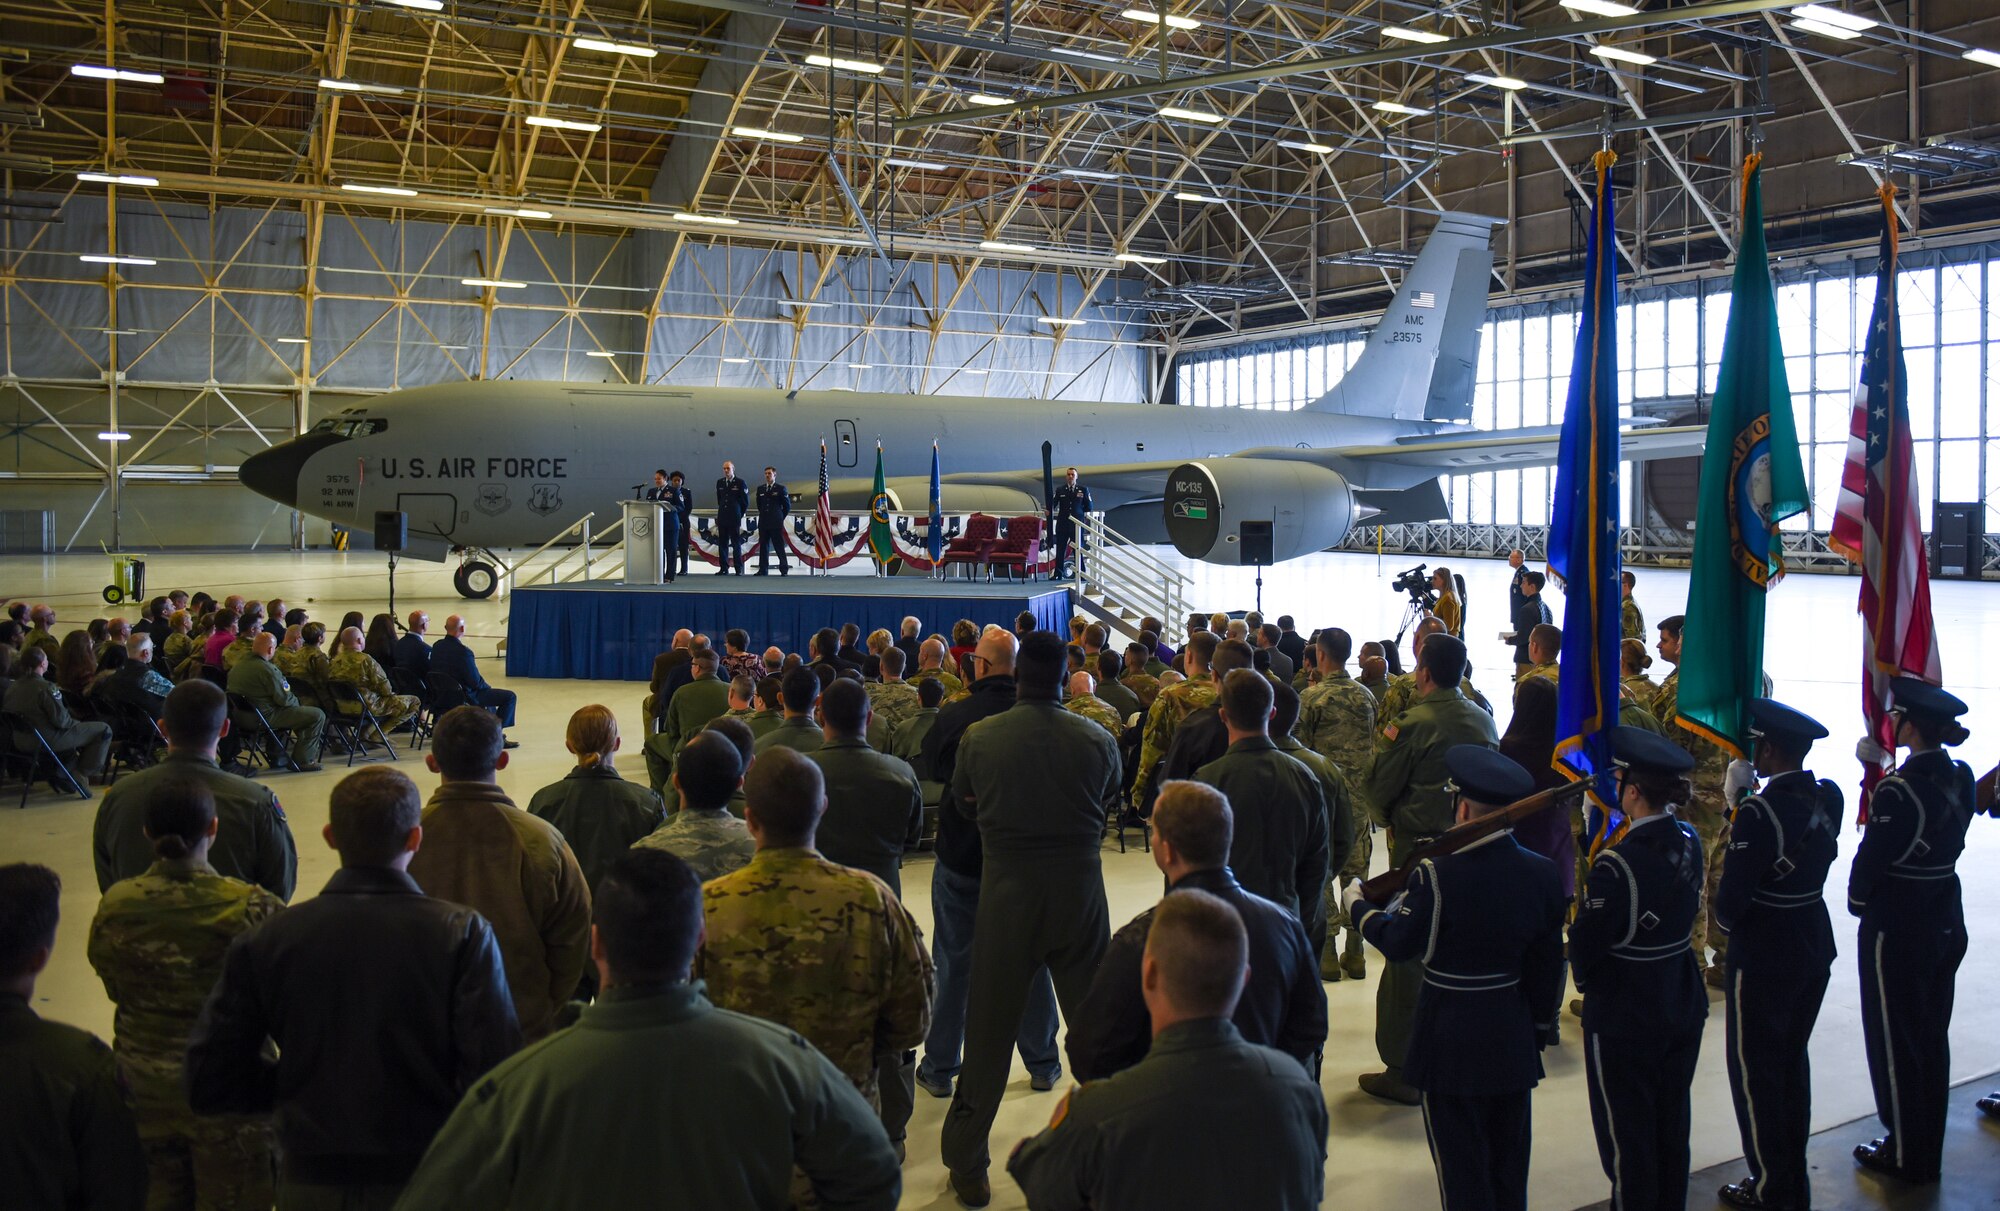 Members of Team Fairchild and the surrounding community gather for the 97th Air Refueling Squadron’s reactivation ceremony and Assumption of Command at Fairchild Air Force Base, Washington Oct. 18, 2019.